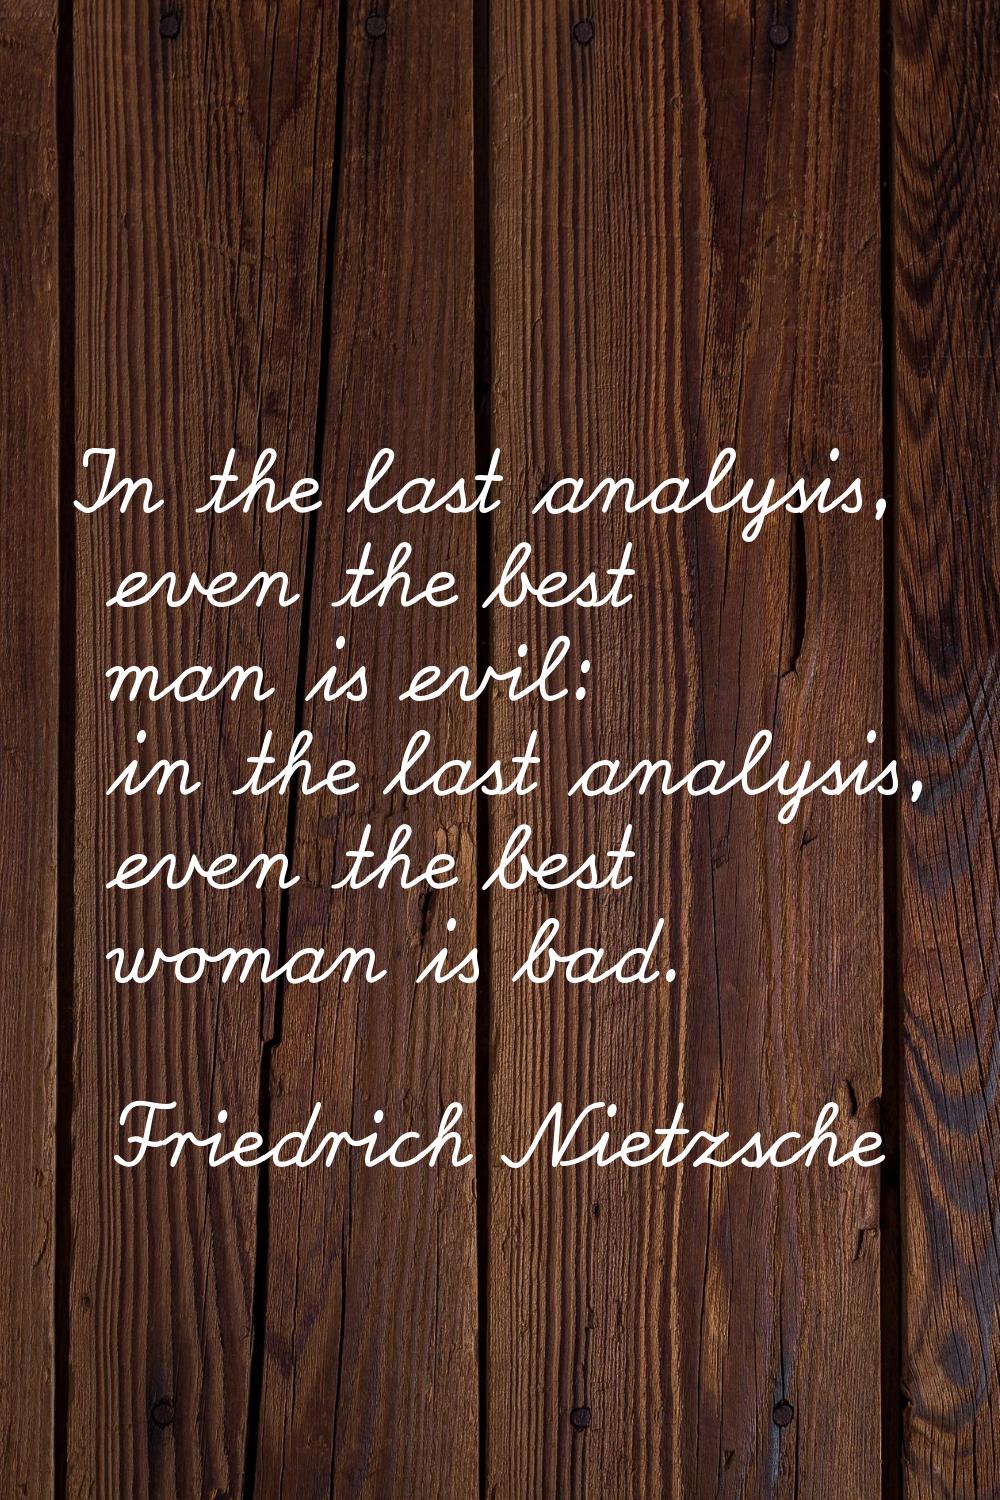 In the last analysis, even the best man is evil: in the last analysis, even the best woman is bad.